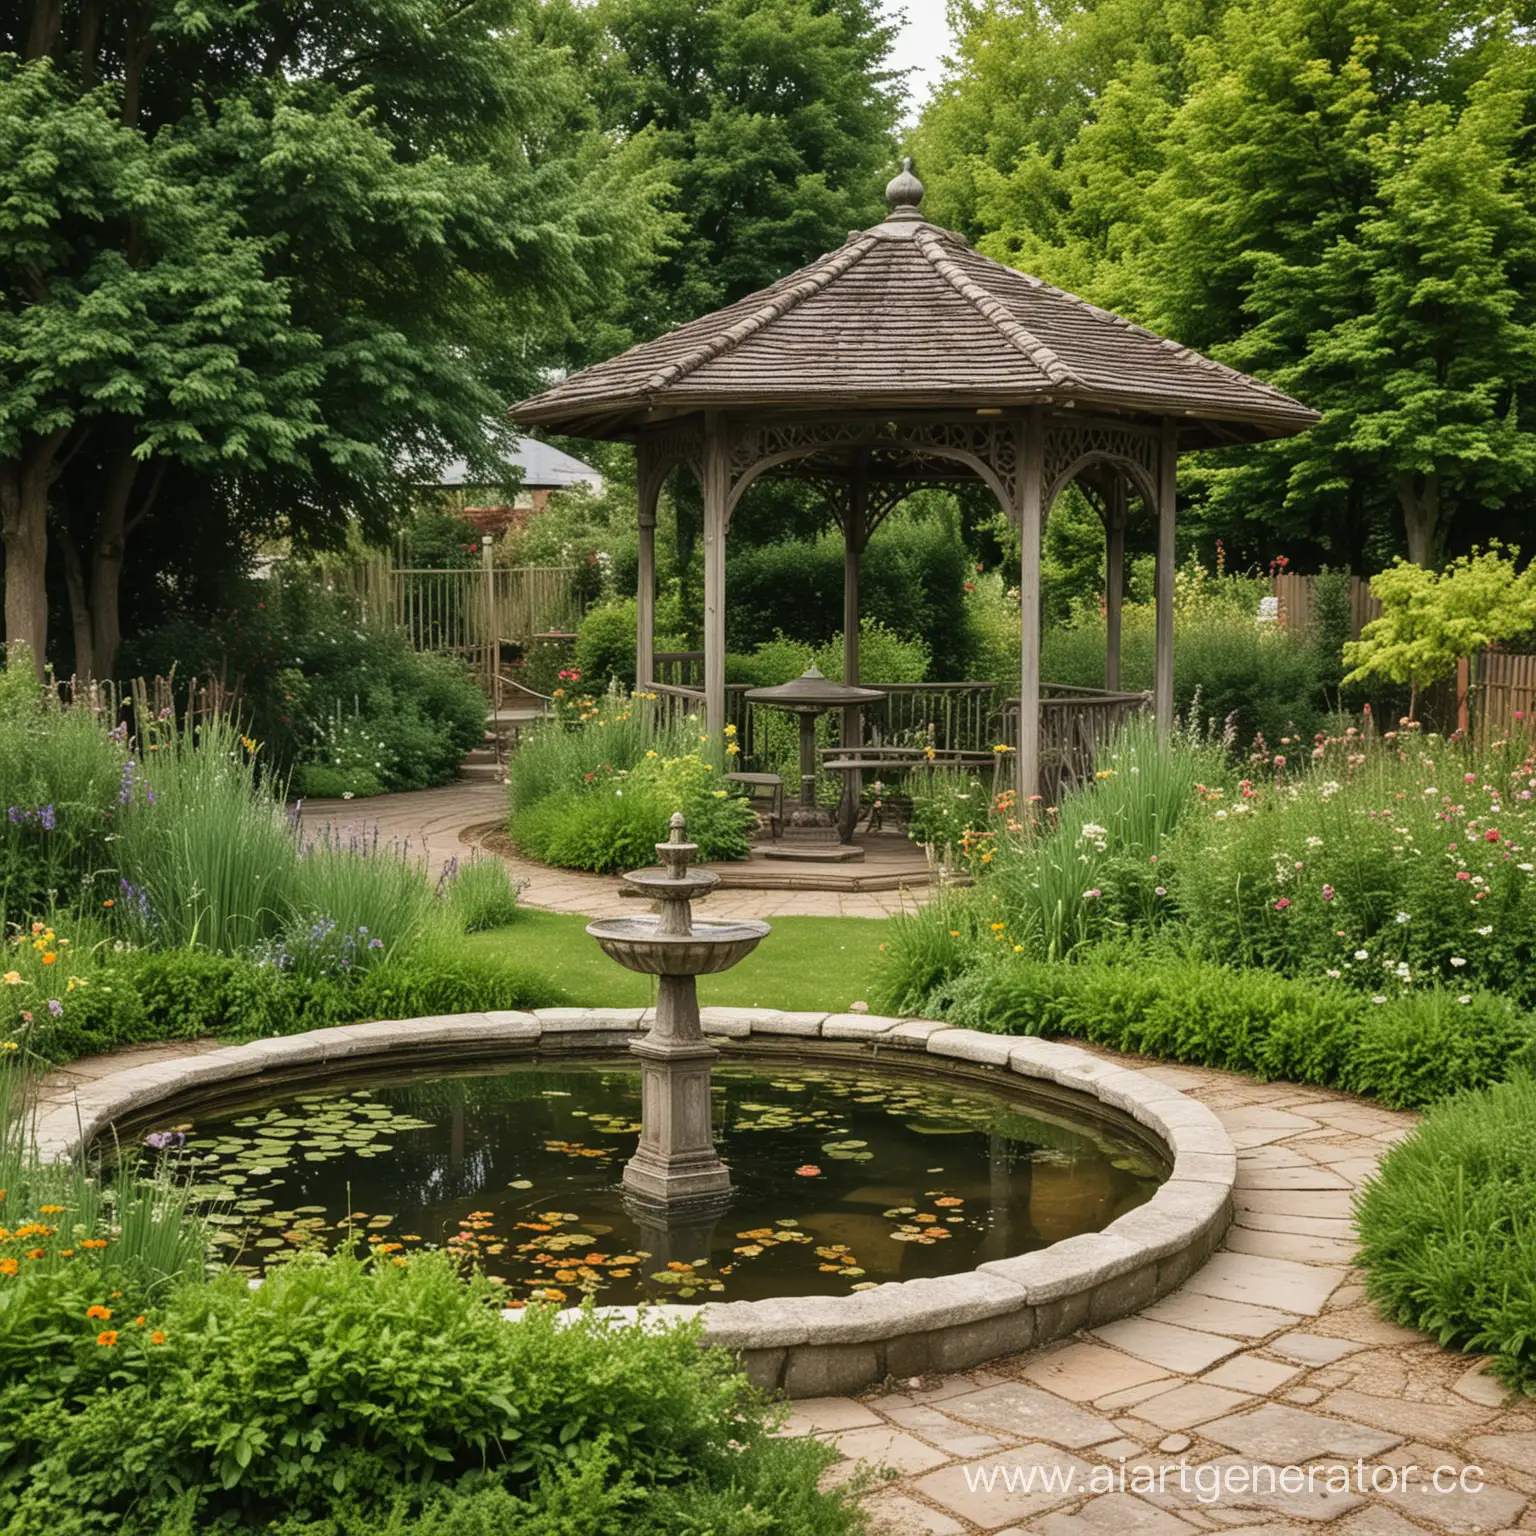 Serene-Old-Garden-with-Gazebo-and-Fountain